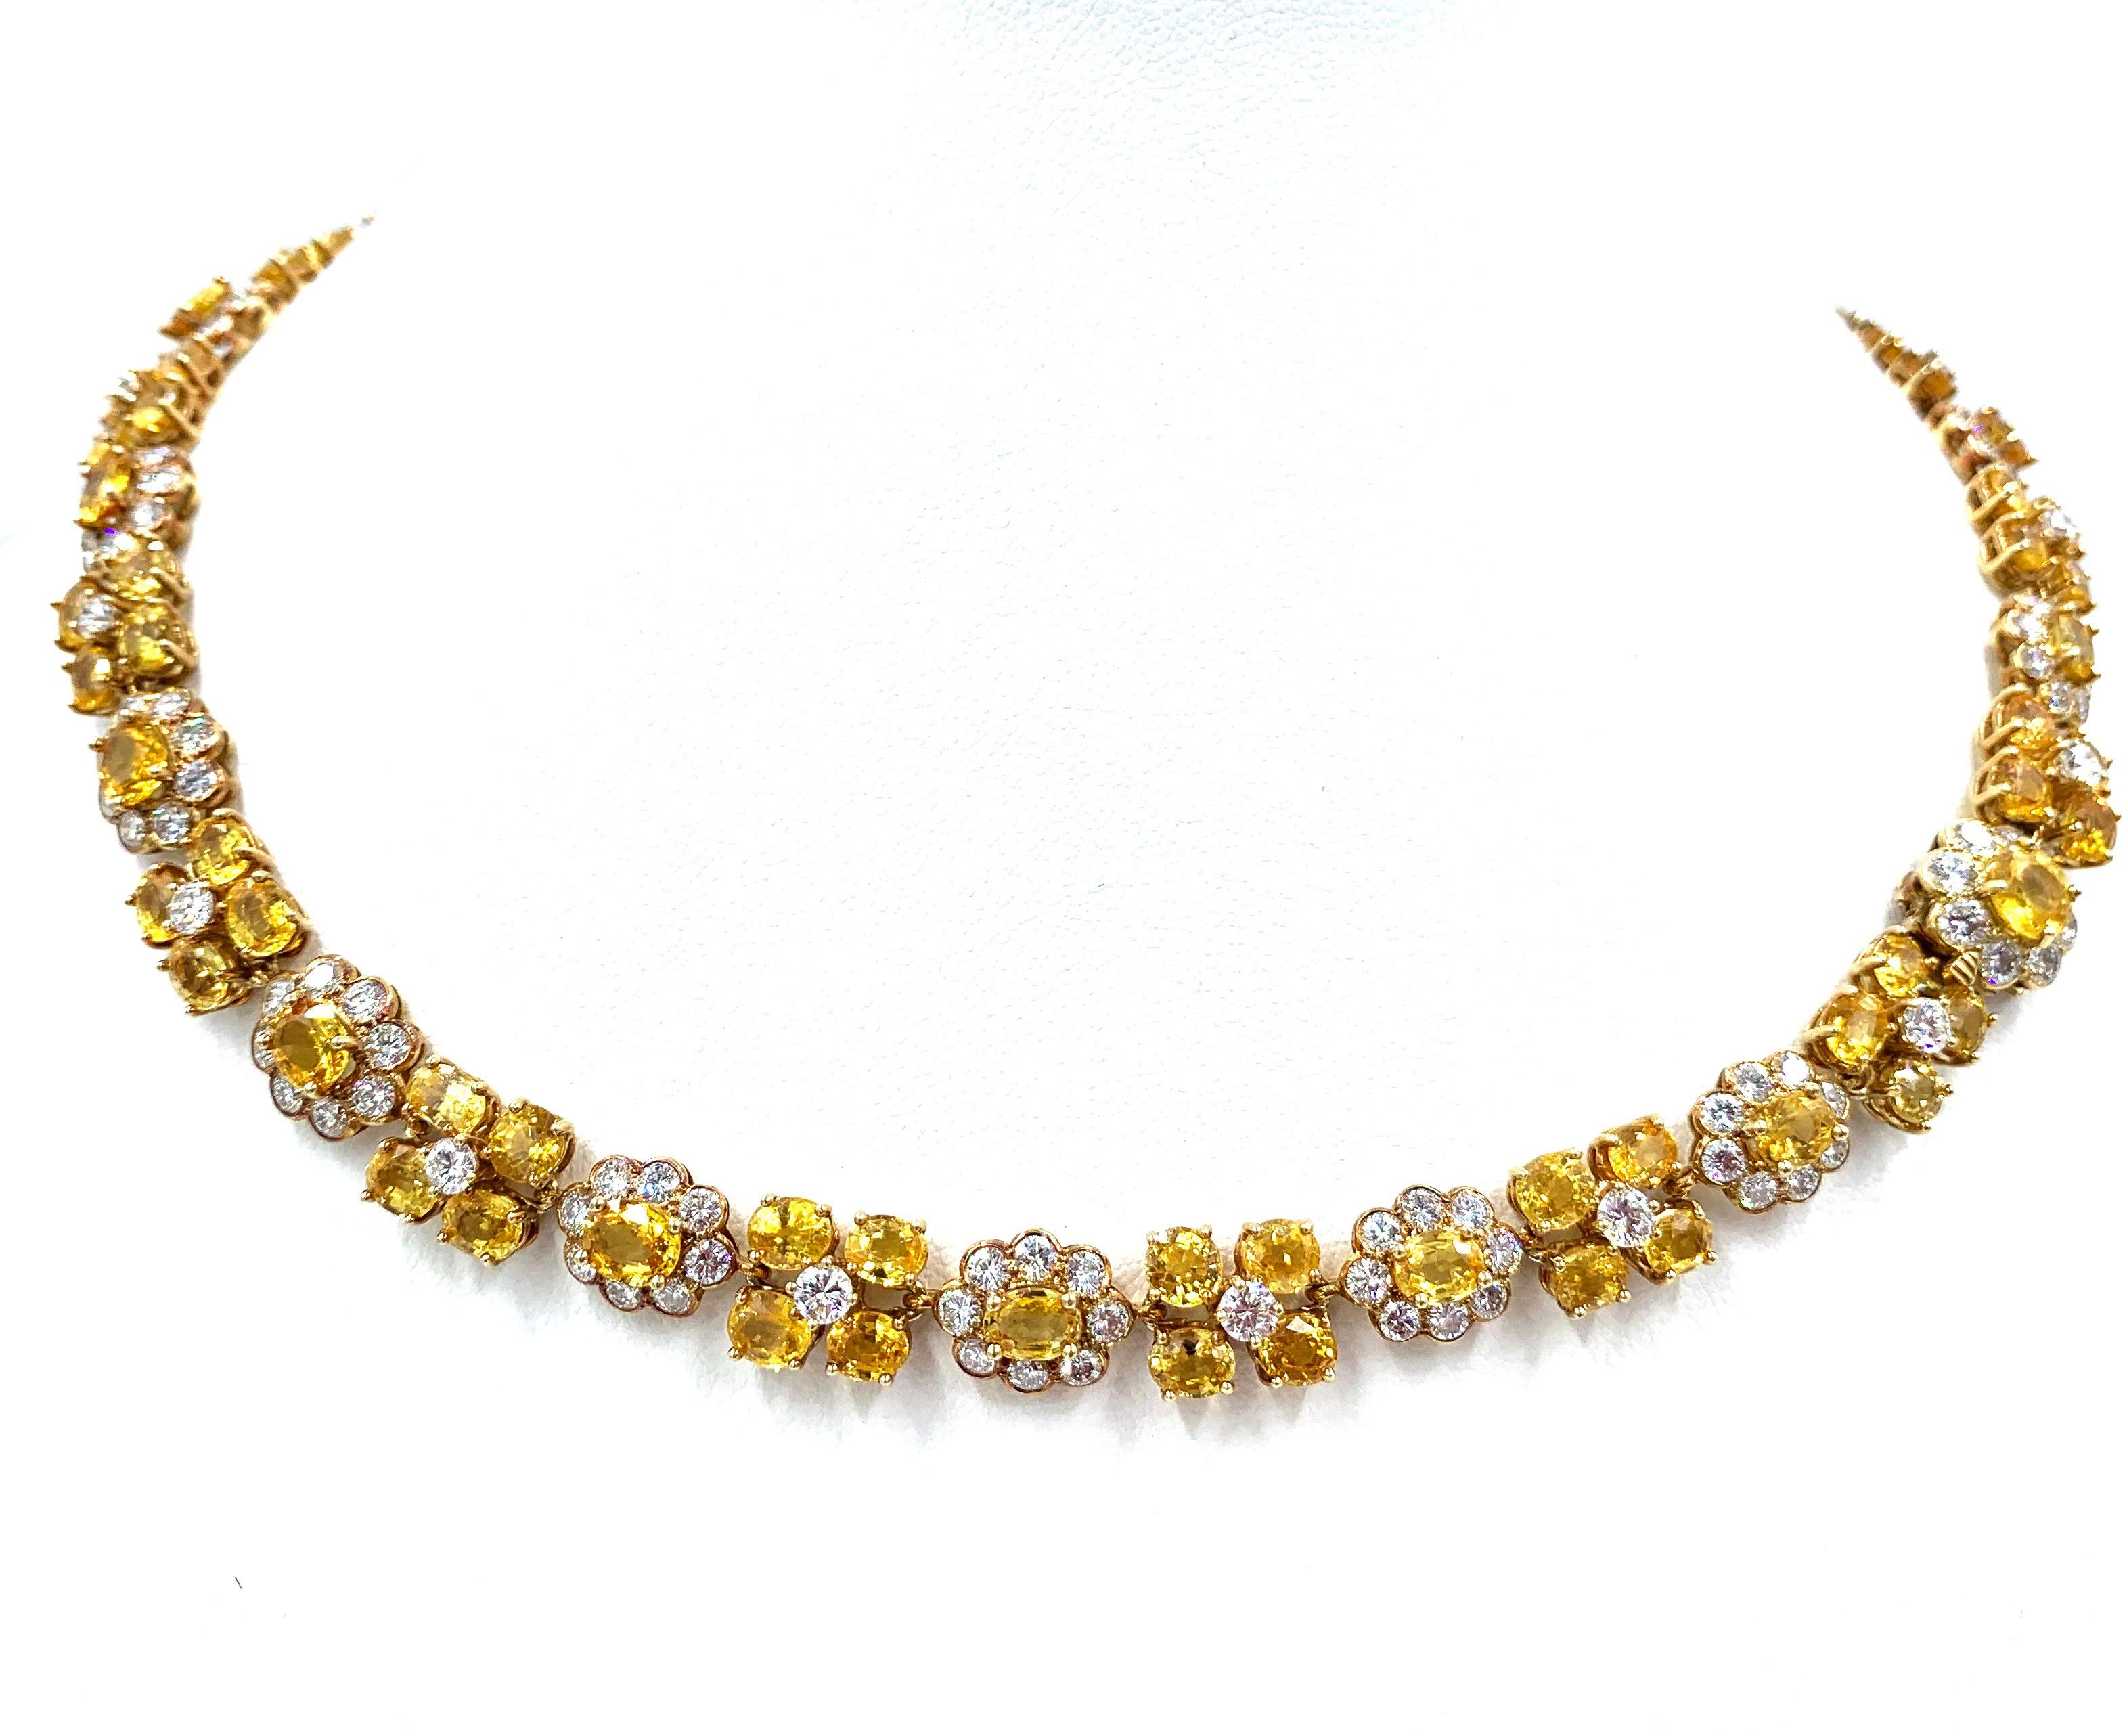 Women's or Men's Van Cleef & Arpels Natural Yellow Ceylon Sapphire and Diamond Necklace For Sale